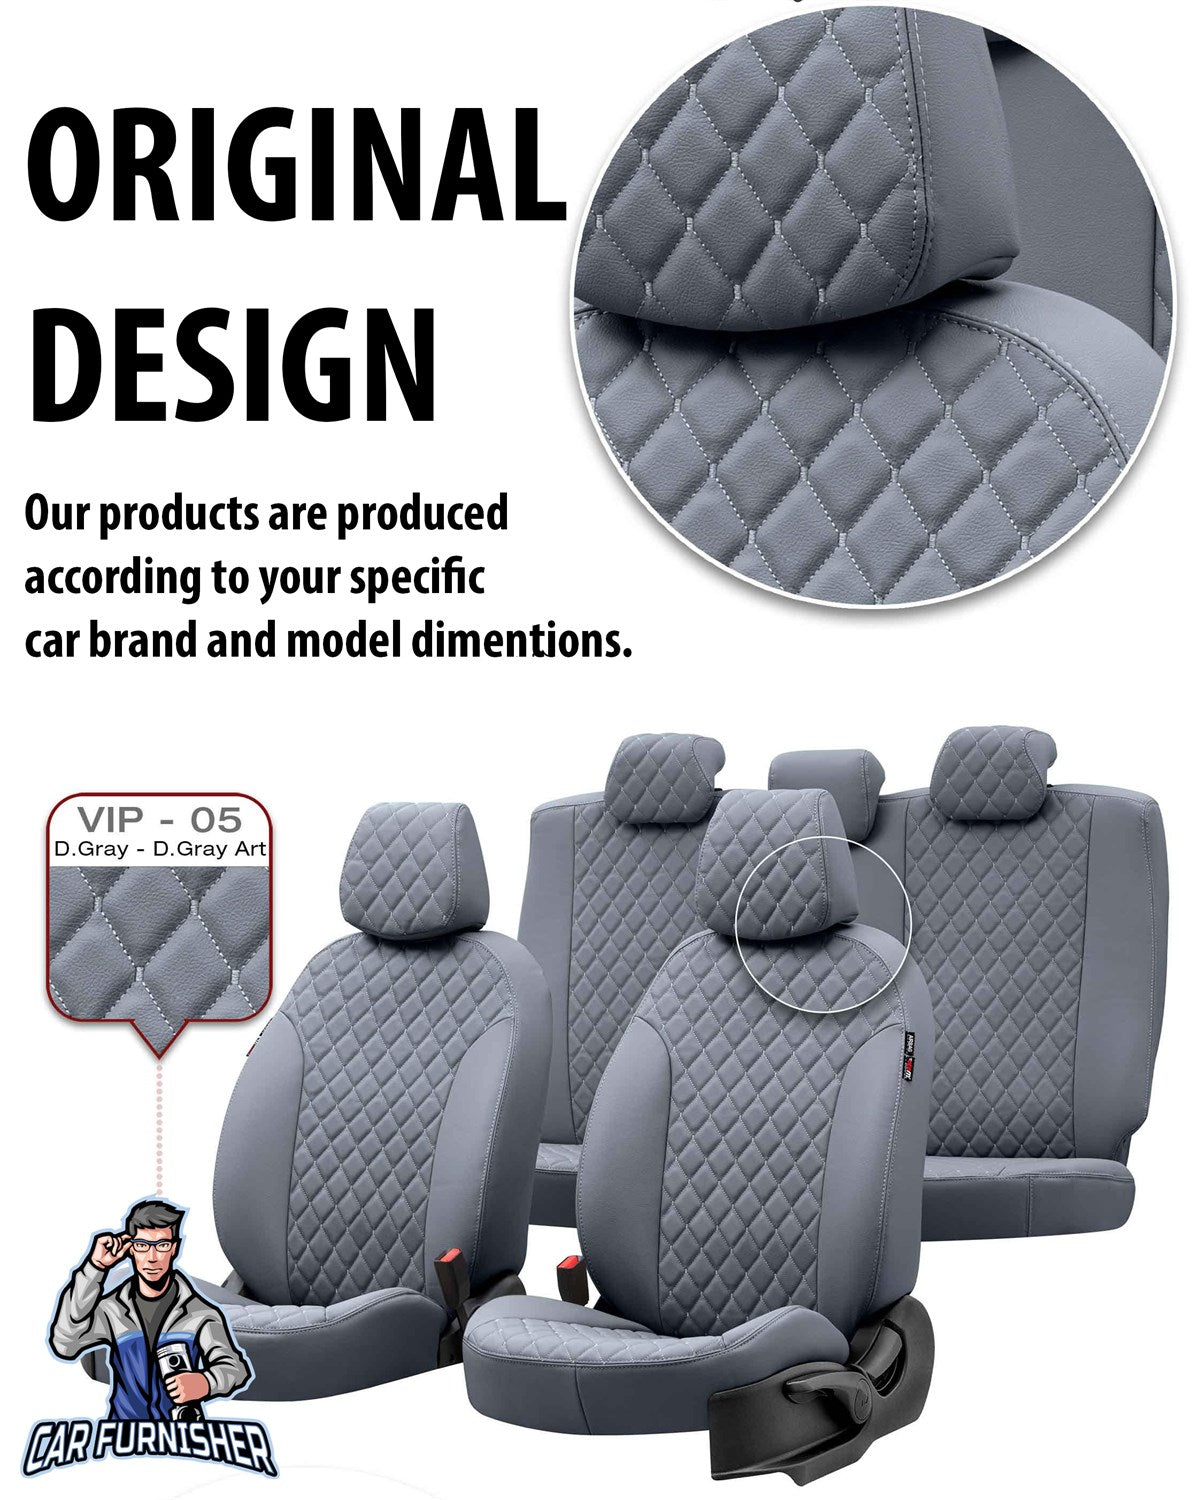 Nissan X-Trail Seat Covers Madrid Leather Design Blue Leather